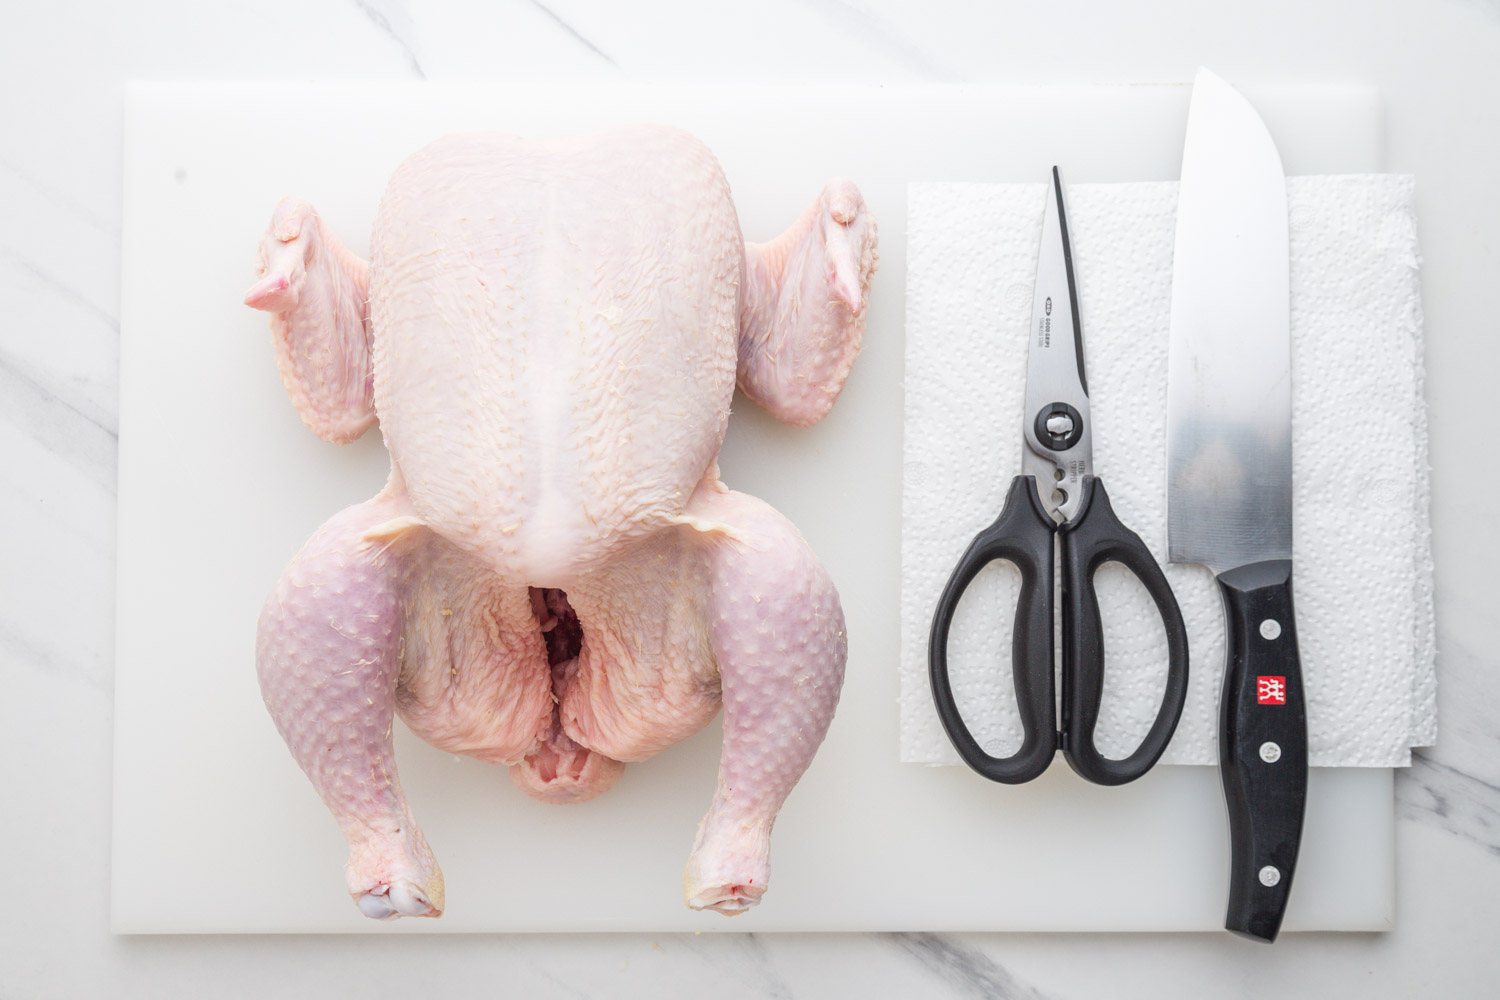 What's needed: a whole chicken, chef's knife, kitchen shears, and paper towels.